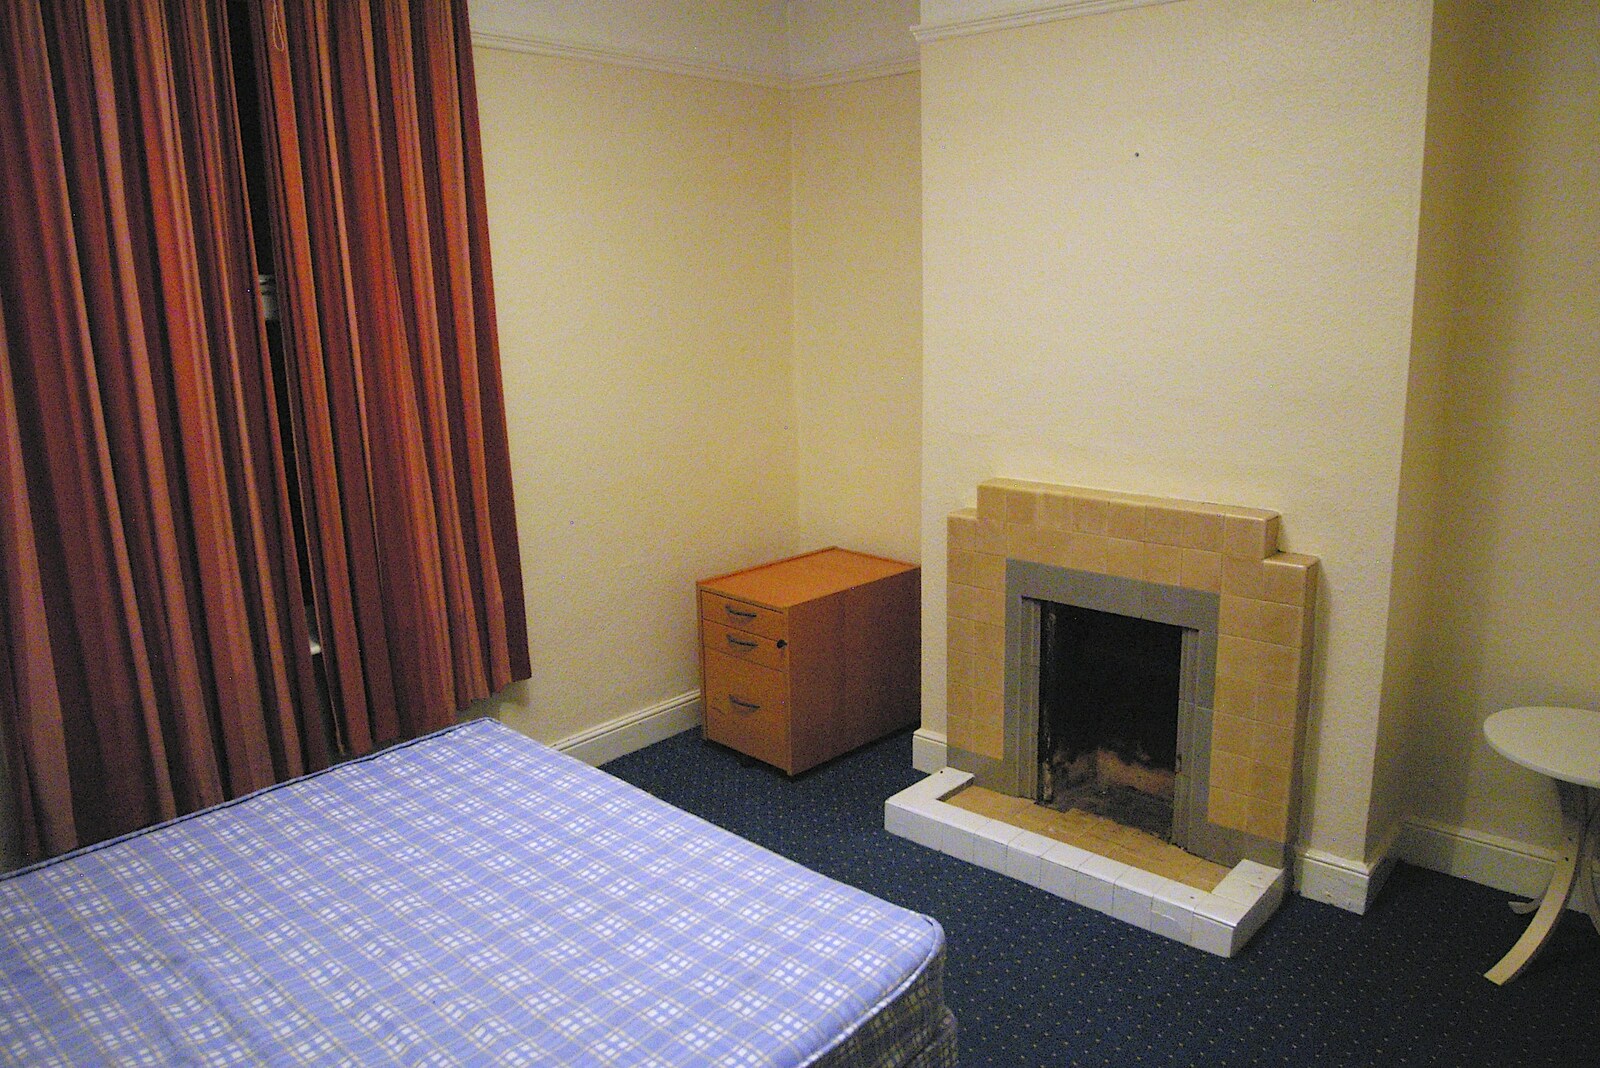 50s glazed fireplace in the bedroom from Qualcomm Christmas, The BBs and Isobel Moves Flats, Cambridge and Ascot, Berkshire - 2nd December 2006